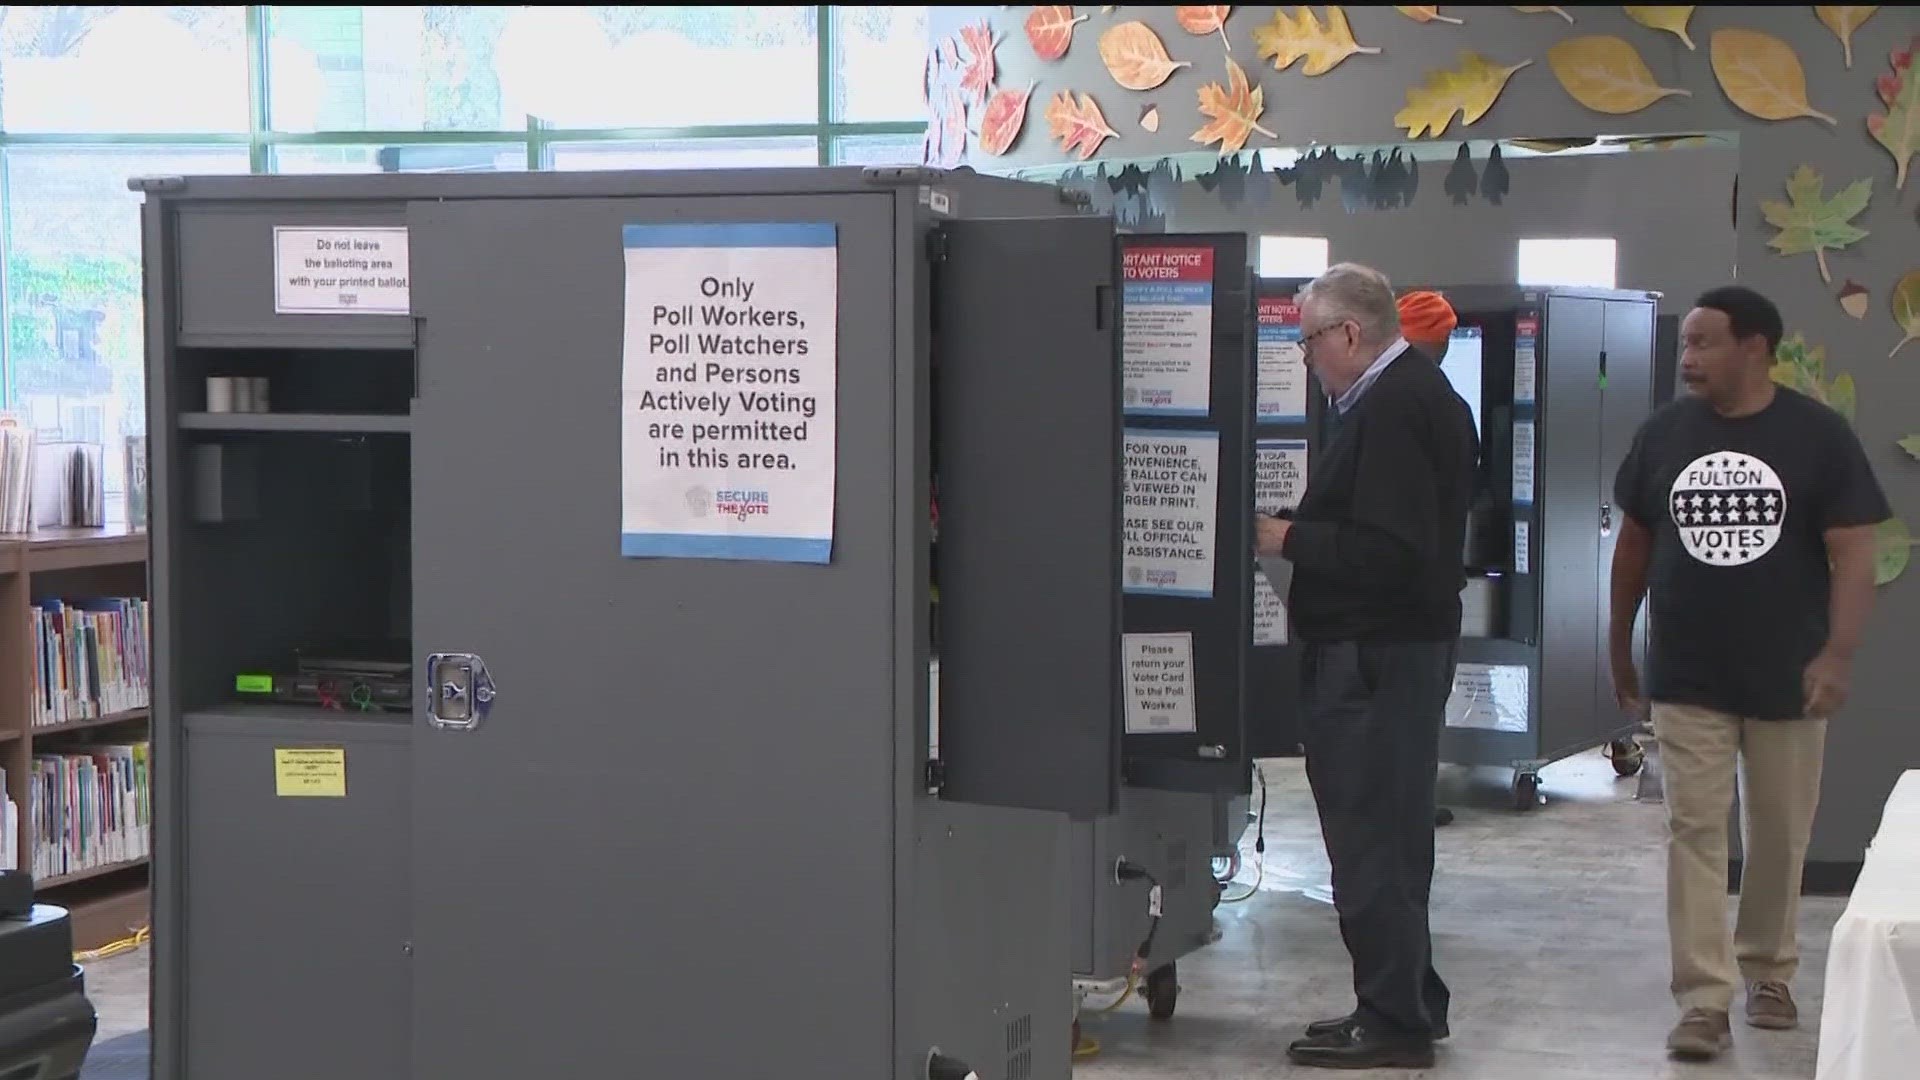 Many voters had their priorities in mind while voting at the Buckhead Library. Many people said they want consistency and quality in Atlanta Public Schools.